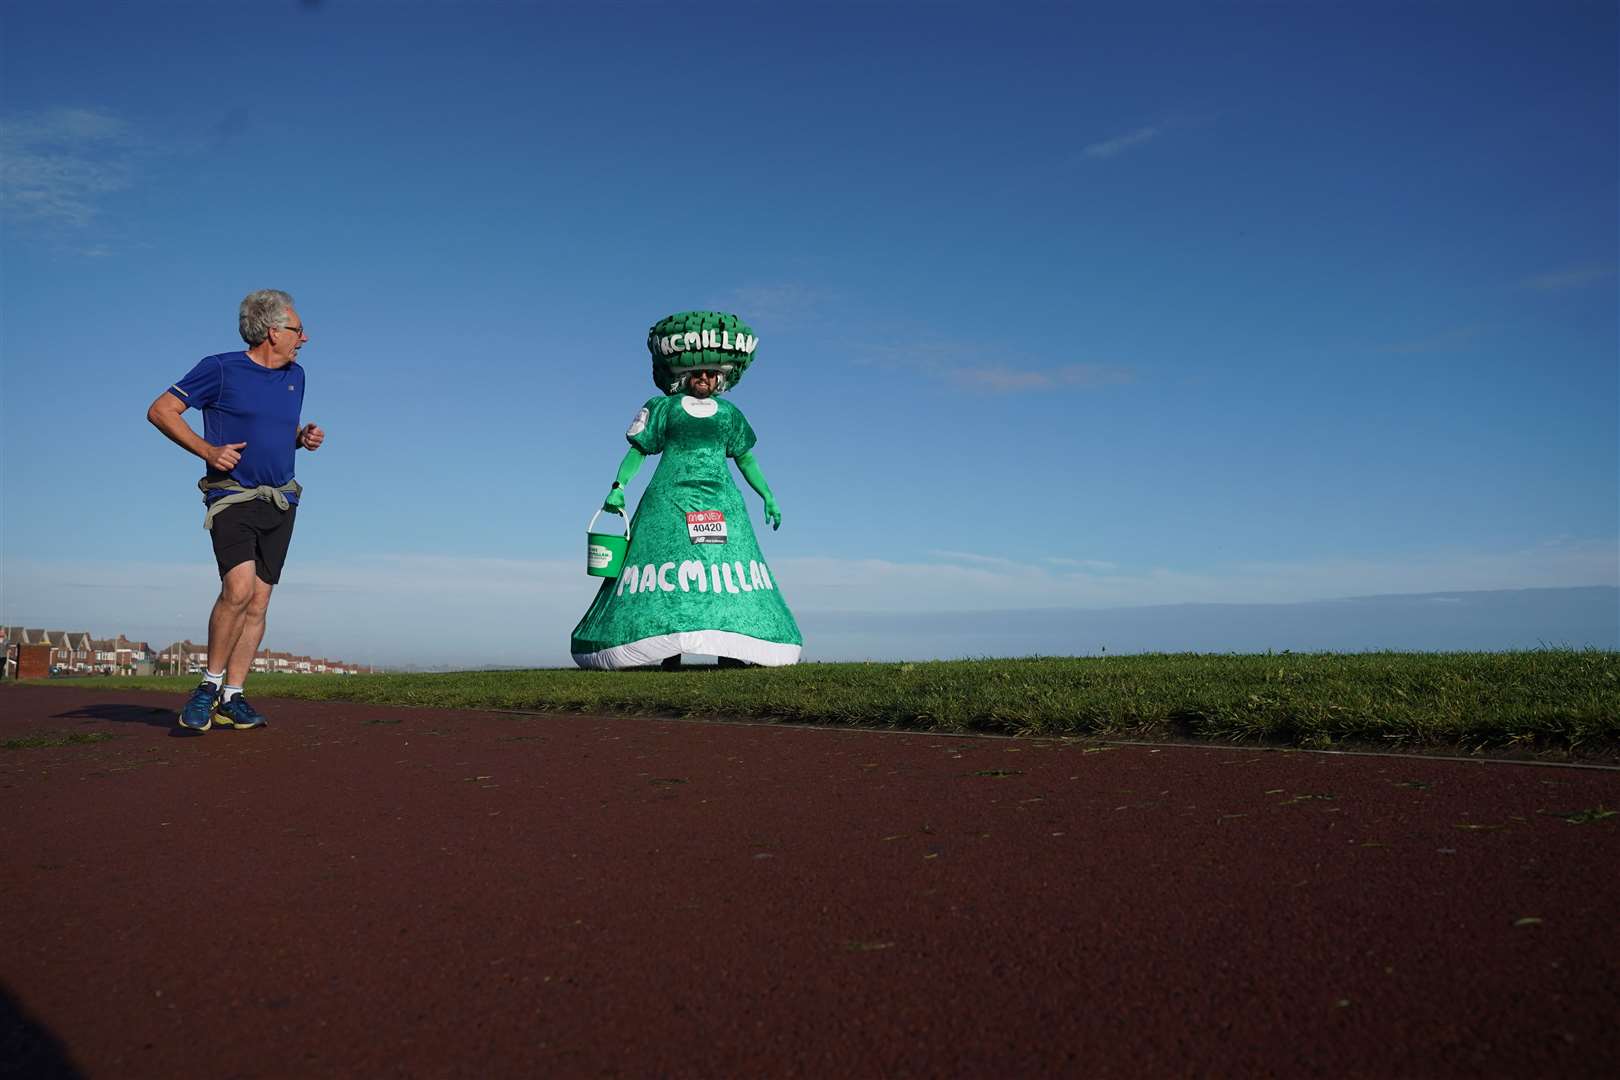 Runners including Colin Burgin-Plews, 52, of South Shields, taking part in costume in aid of cancer charity Macmillan, are undertaking the marathon on their own routes in the 2020 virtual event (Owen Humphreys/PA)